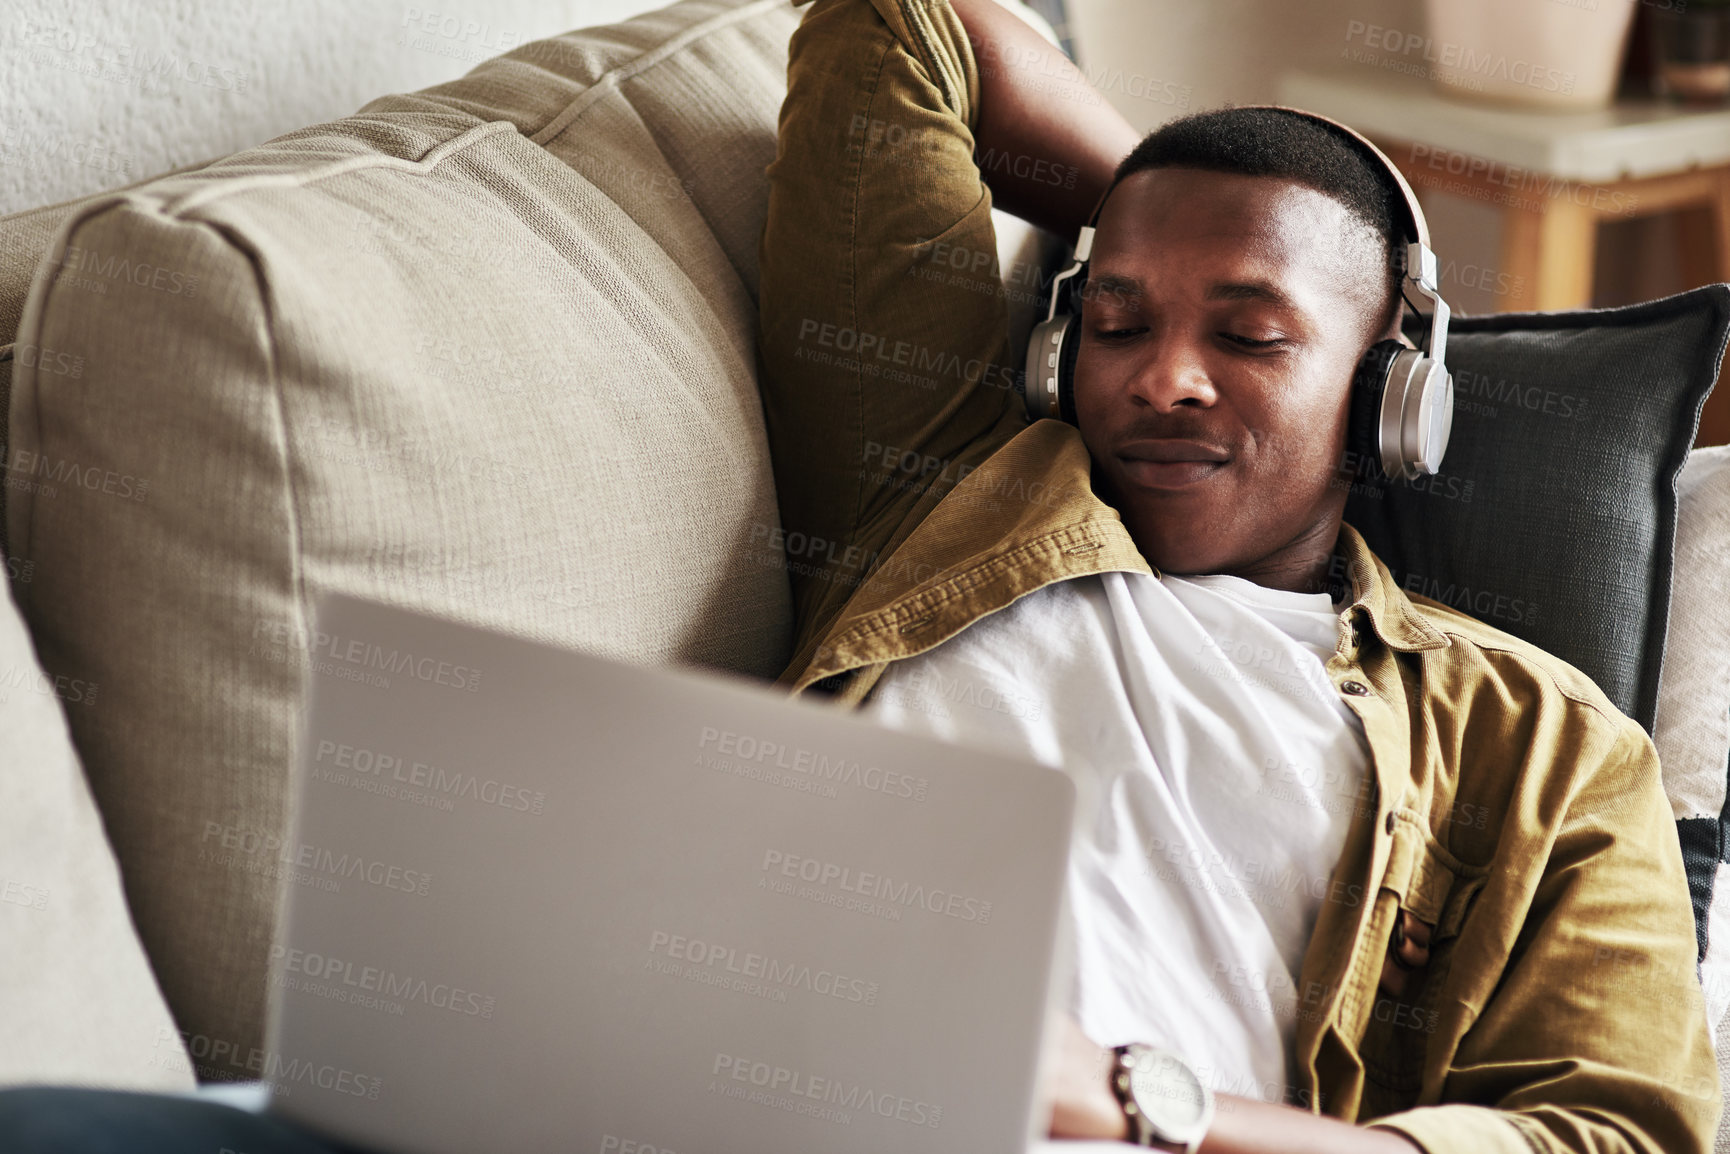 Buy stock photo Cropped shot of a handsome young man using a laptop while listening to music on his headphones in his living room at home